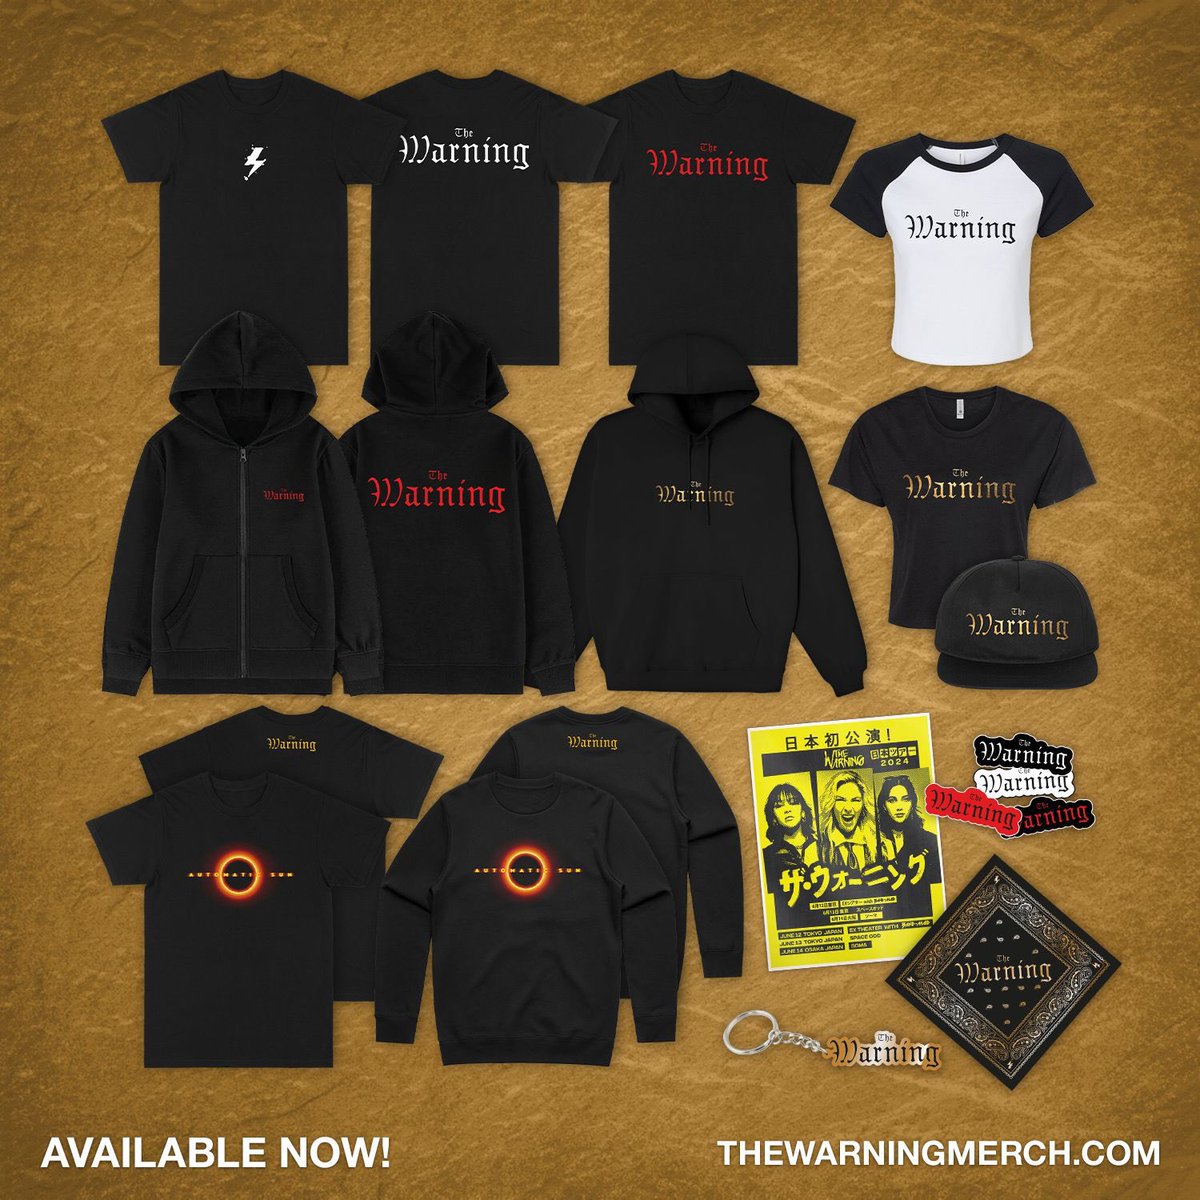 Hey guys! New merch is available at thewarningmerch.com ⚡️
Which one do you like the most? 👀

#TheWarning